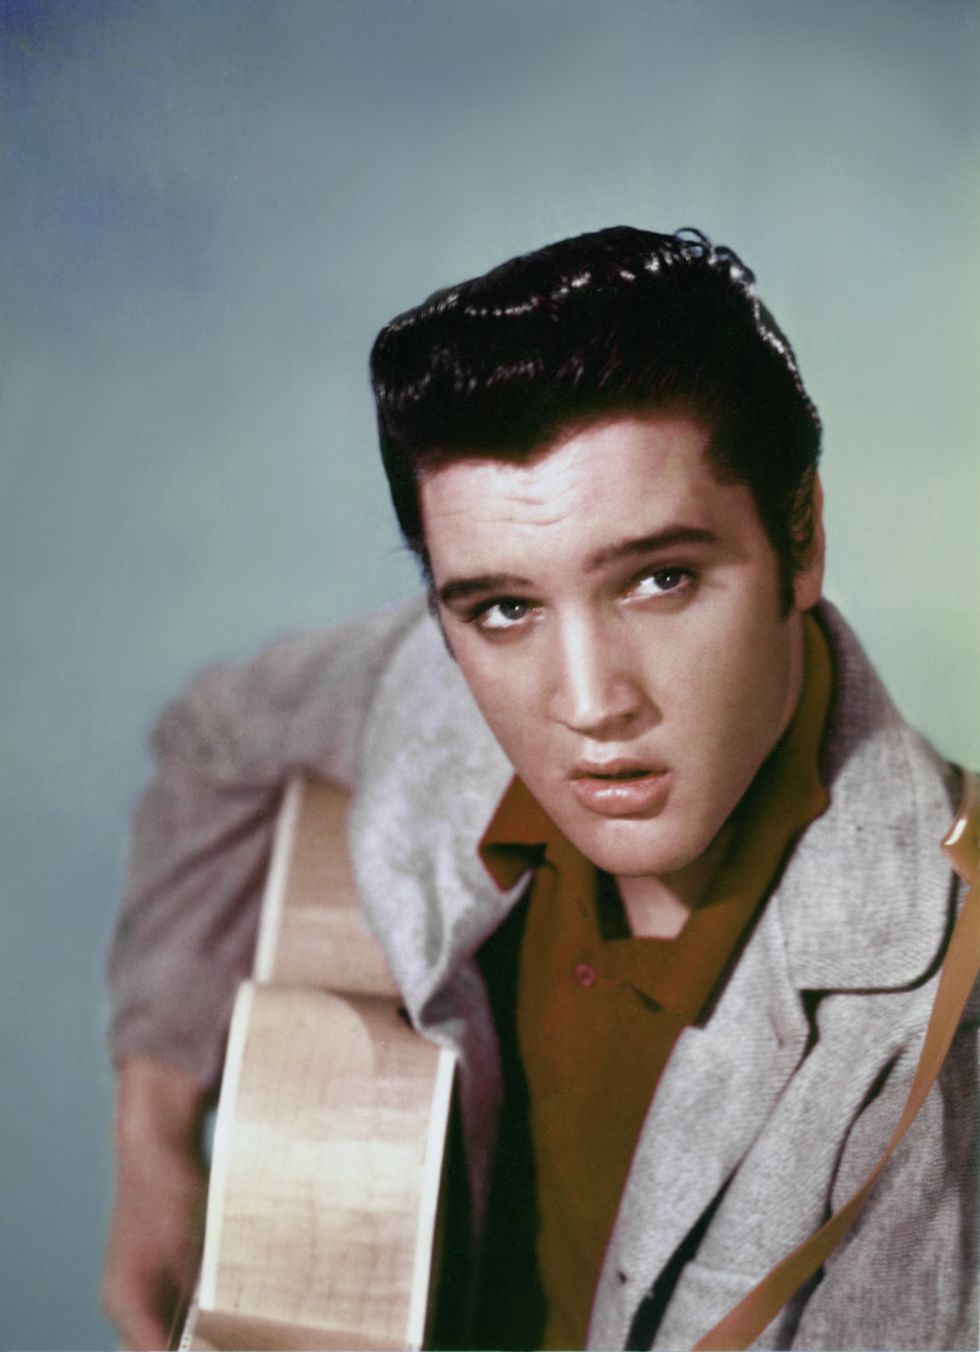 https://hips.hearstapps.com/hmg-prod/images/american-singer-and-actor-elvis-presley-promoting-the-movie-news-photo-1590524058.jpg?crop=1xw:1xh;center,top&resize=980:*